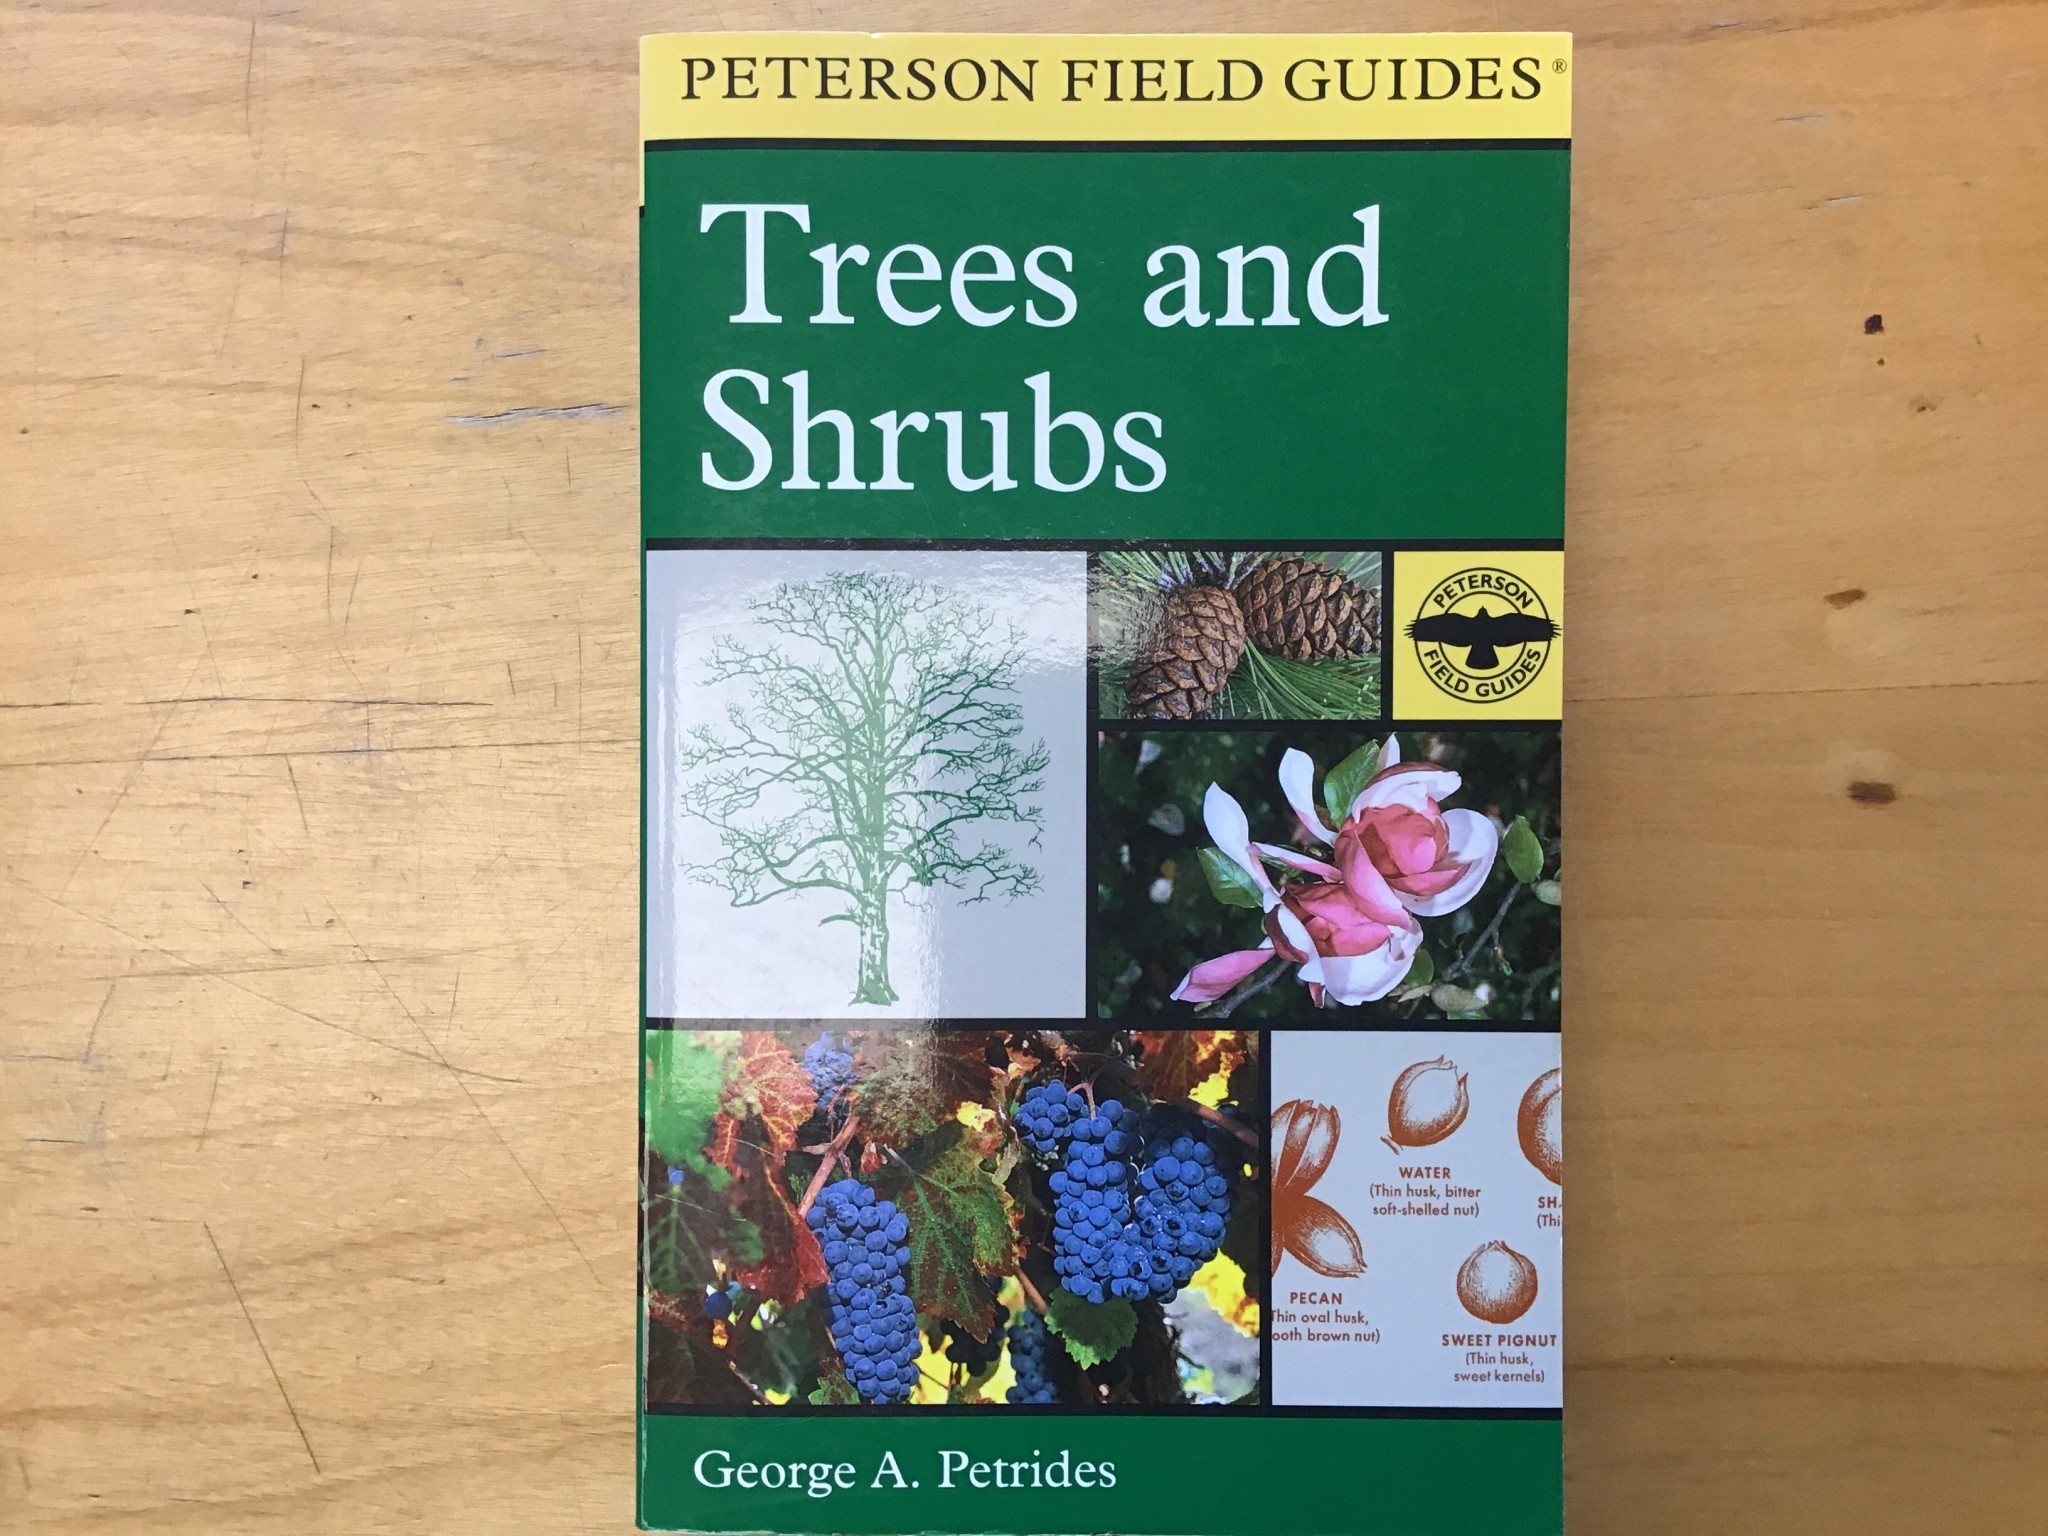 PETERSON FIELD GUIDE TREES AND SHRUBS